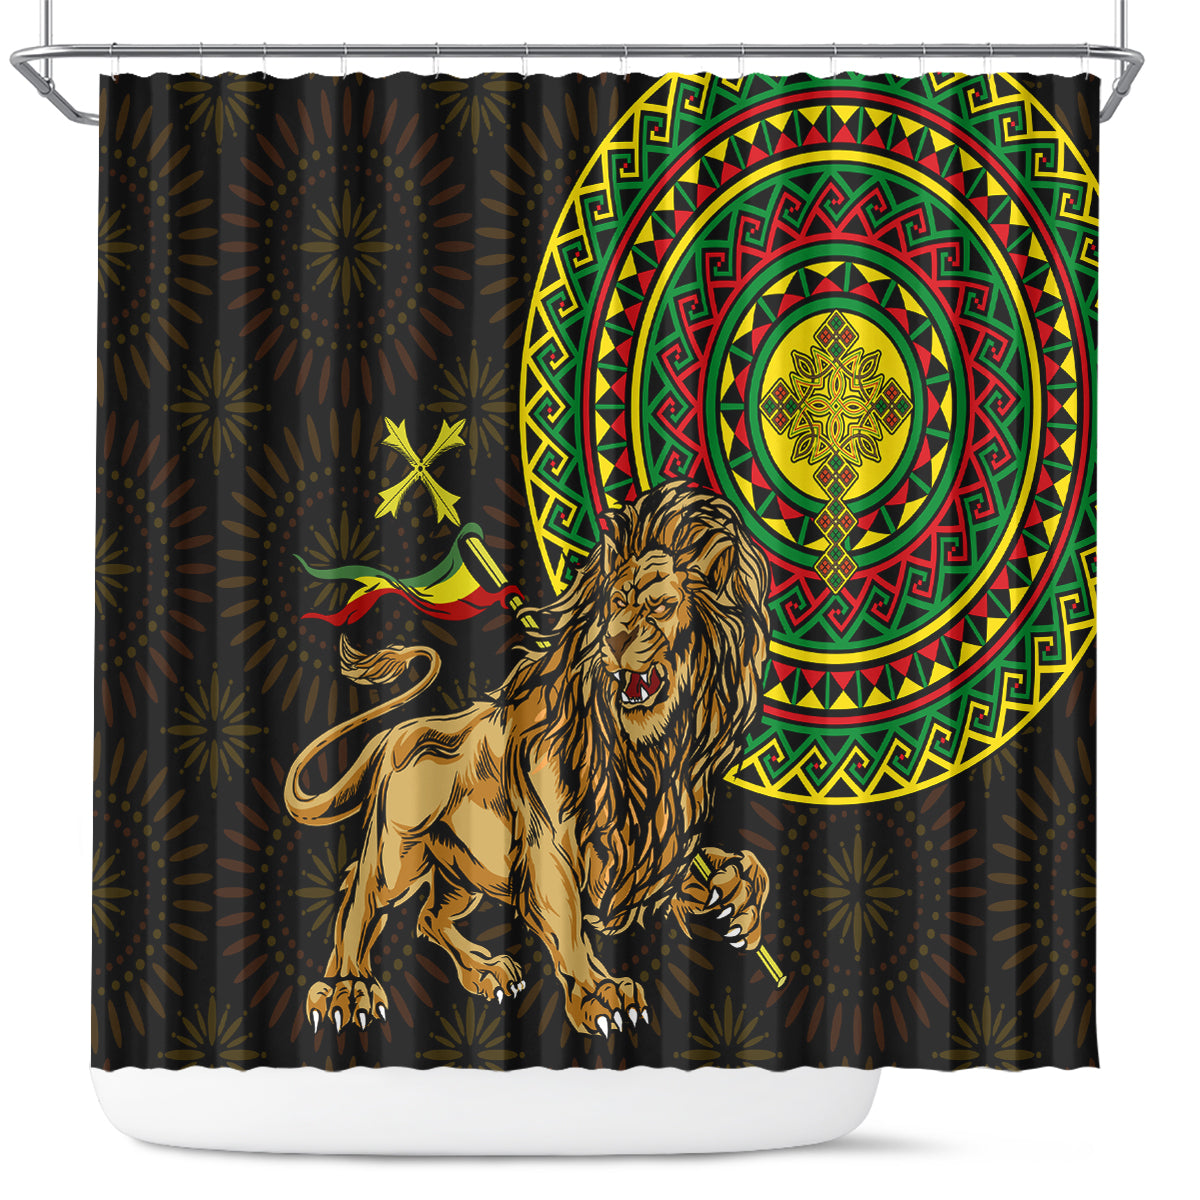 Ethiopia National Day Shower Curtain Lion Of Judah African Pattern